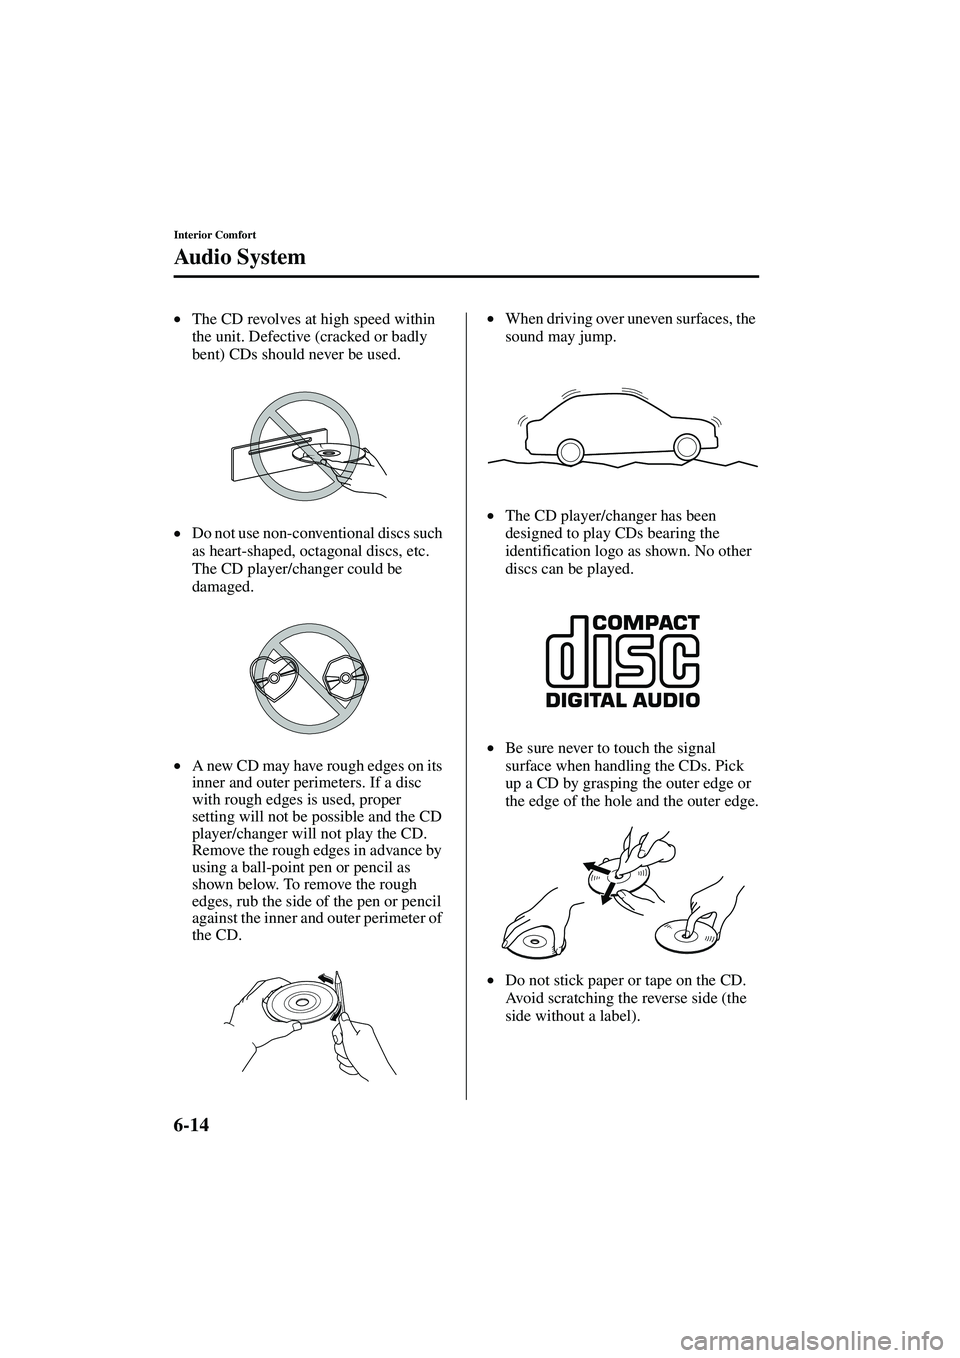 MAZDA MODEL MX-5 MIATA 2004  Owners Manual 6-14
Interior Comfort
Au di o S ys t em
Form No. 8S15-EA-03G
•The CD revolves at high speed within 
the unit. Defective (cracked or badly 
bent) CDs should never be used.
• Do not use non-conventi